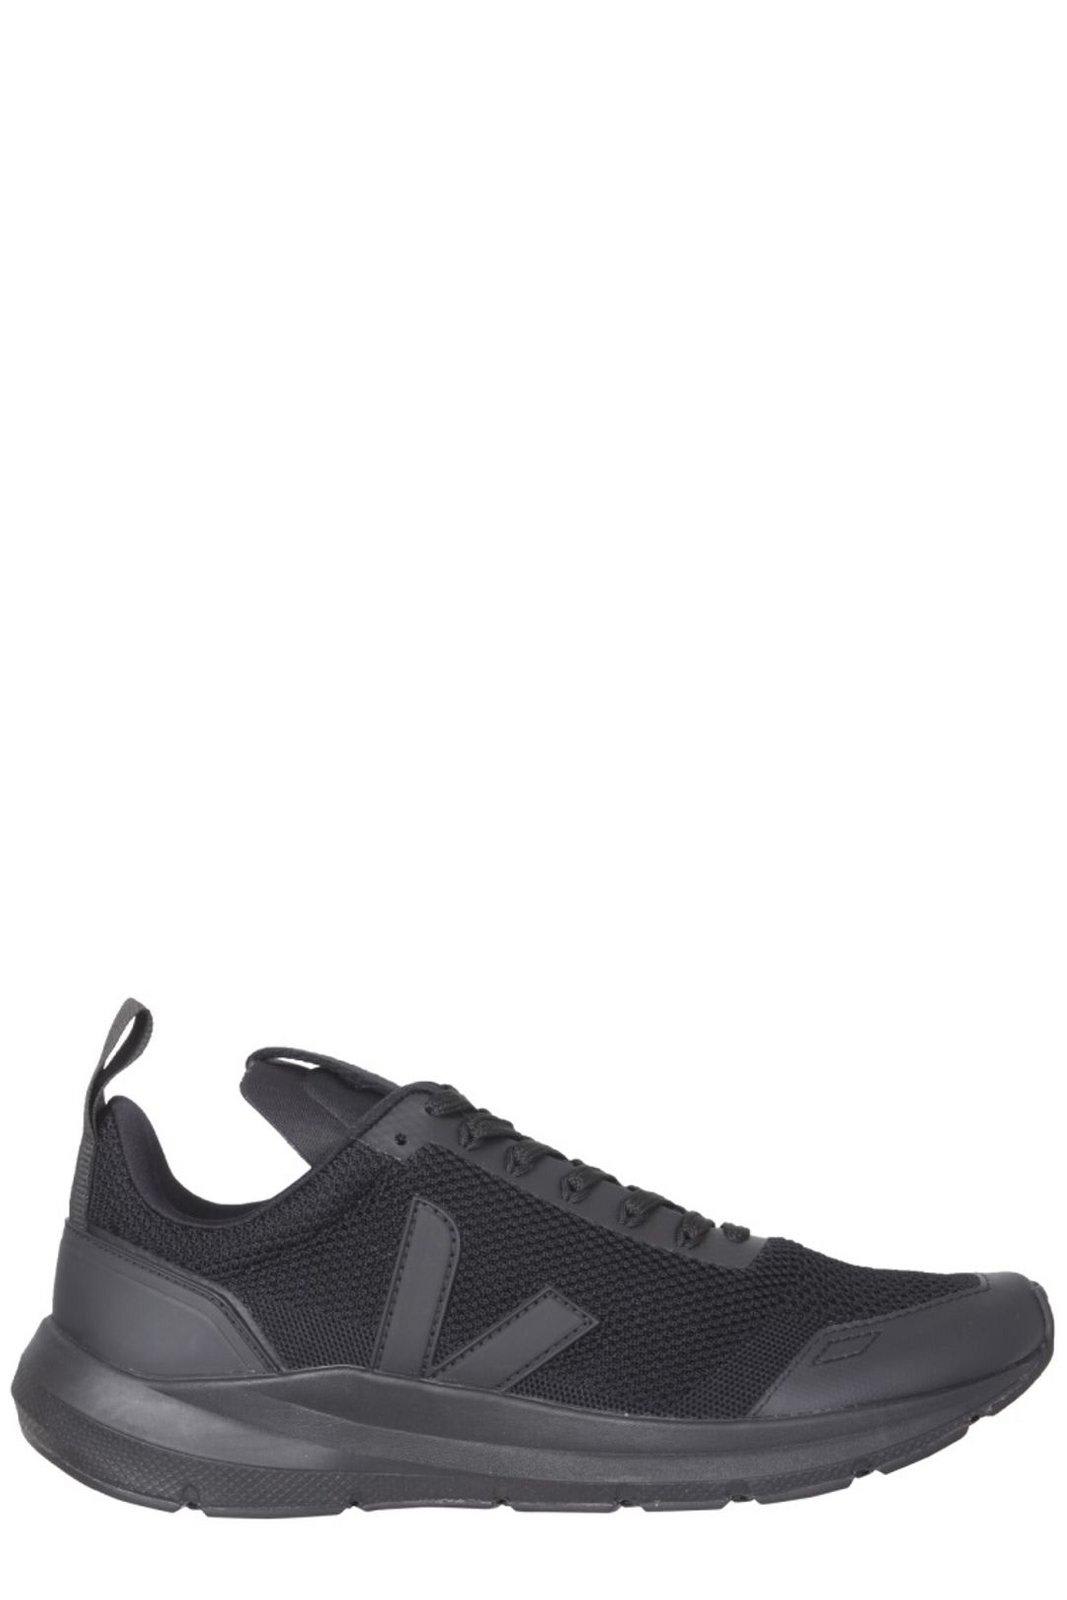 Rick Owens x Veja Lace-up Sneakers